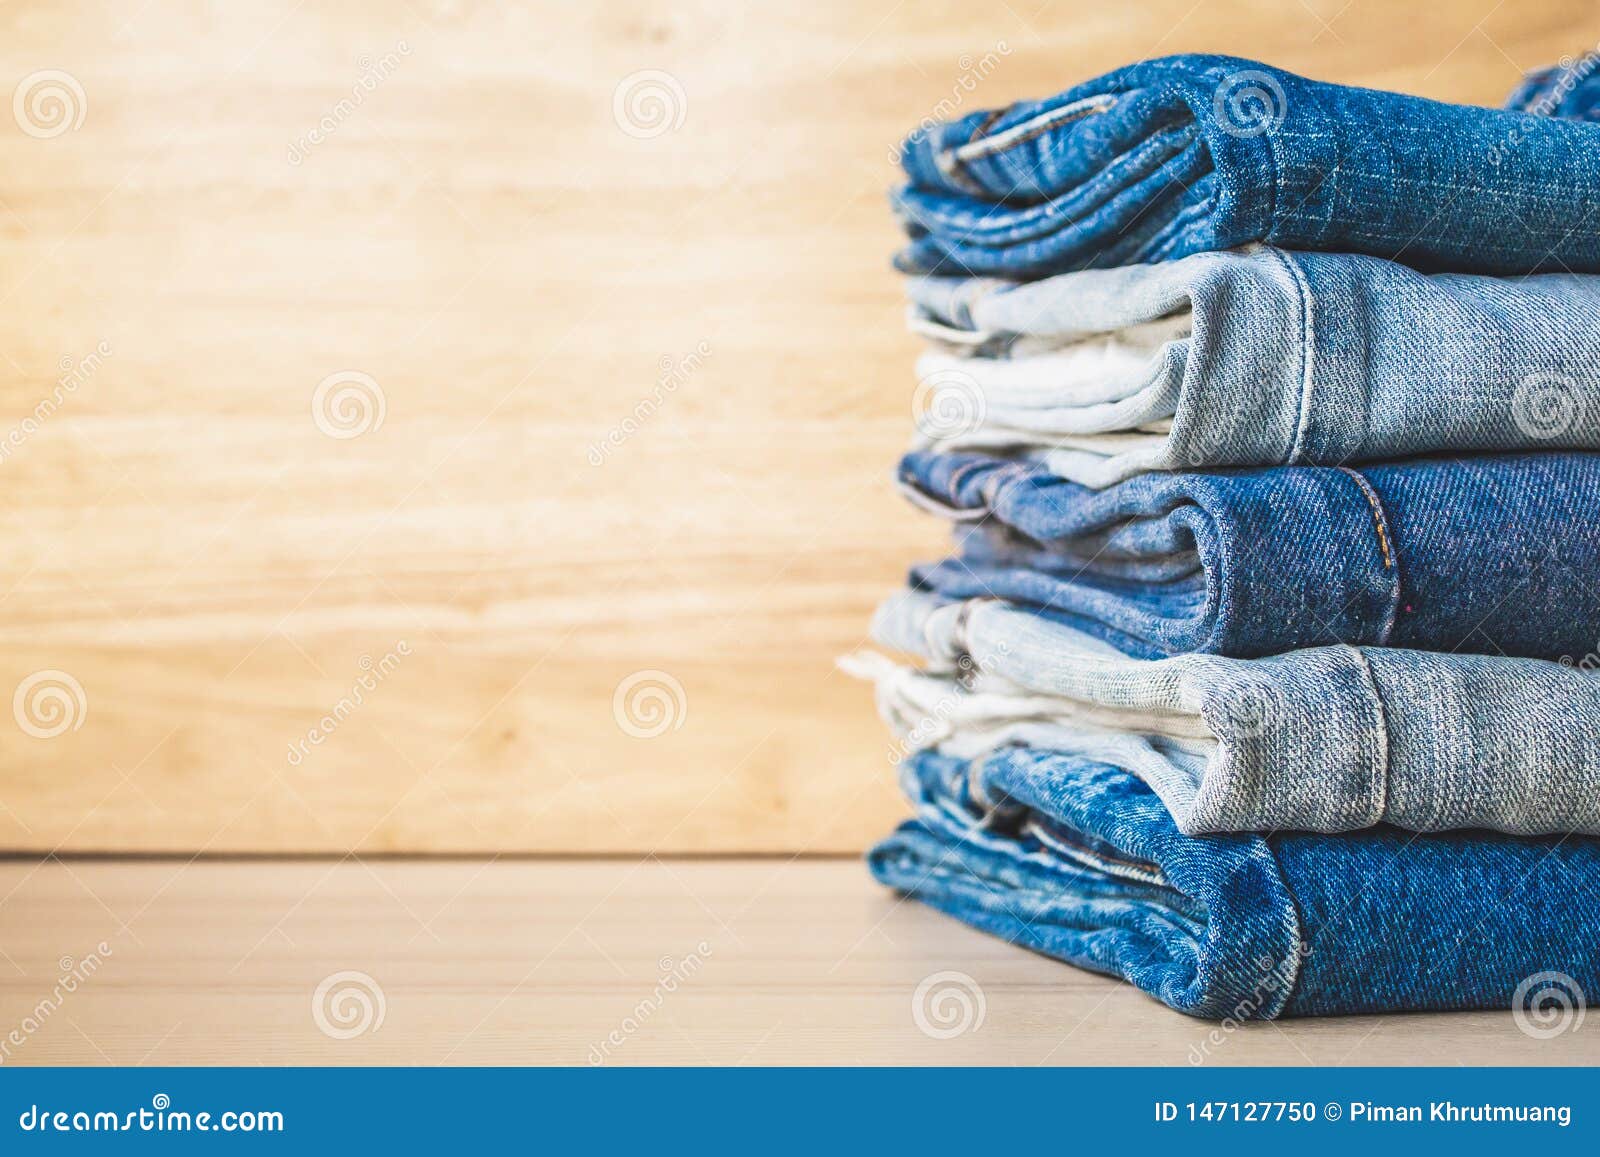 Denim Blue Jeans Stack On Wood Table Background Stock Photo - Image of ...